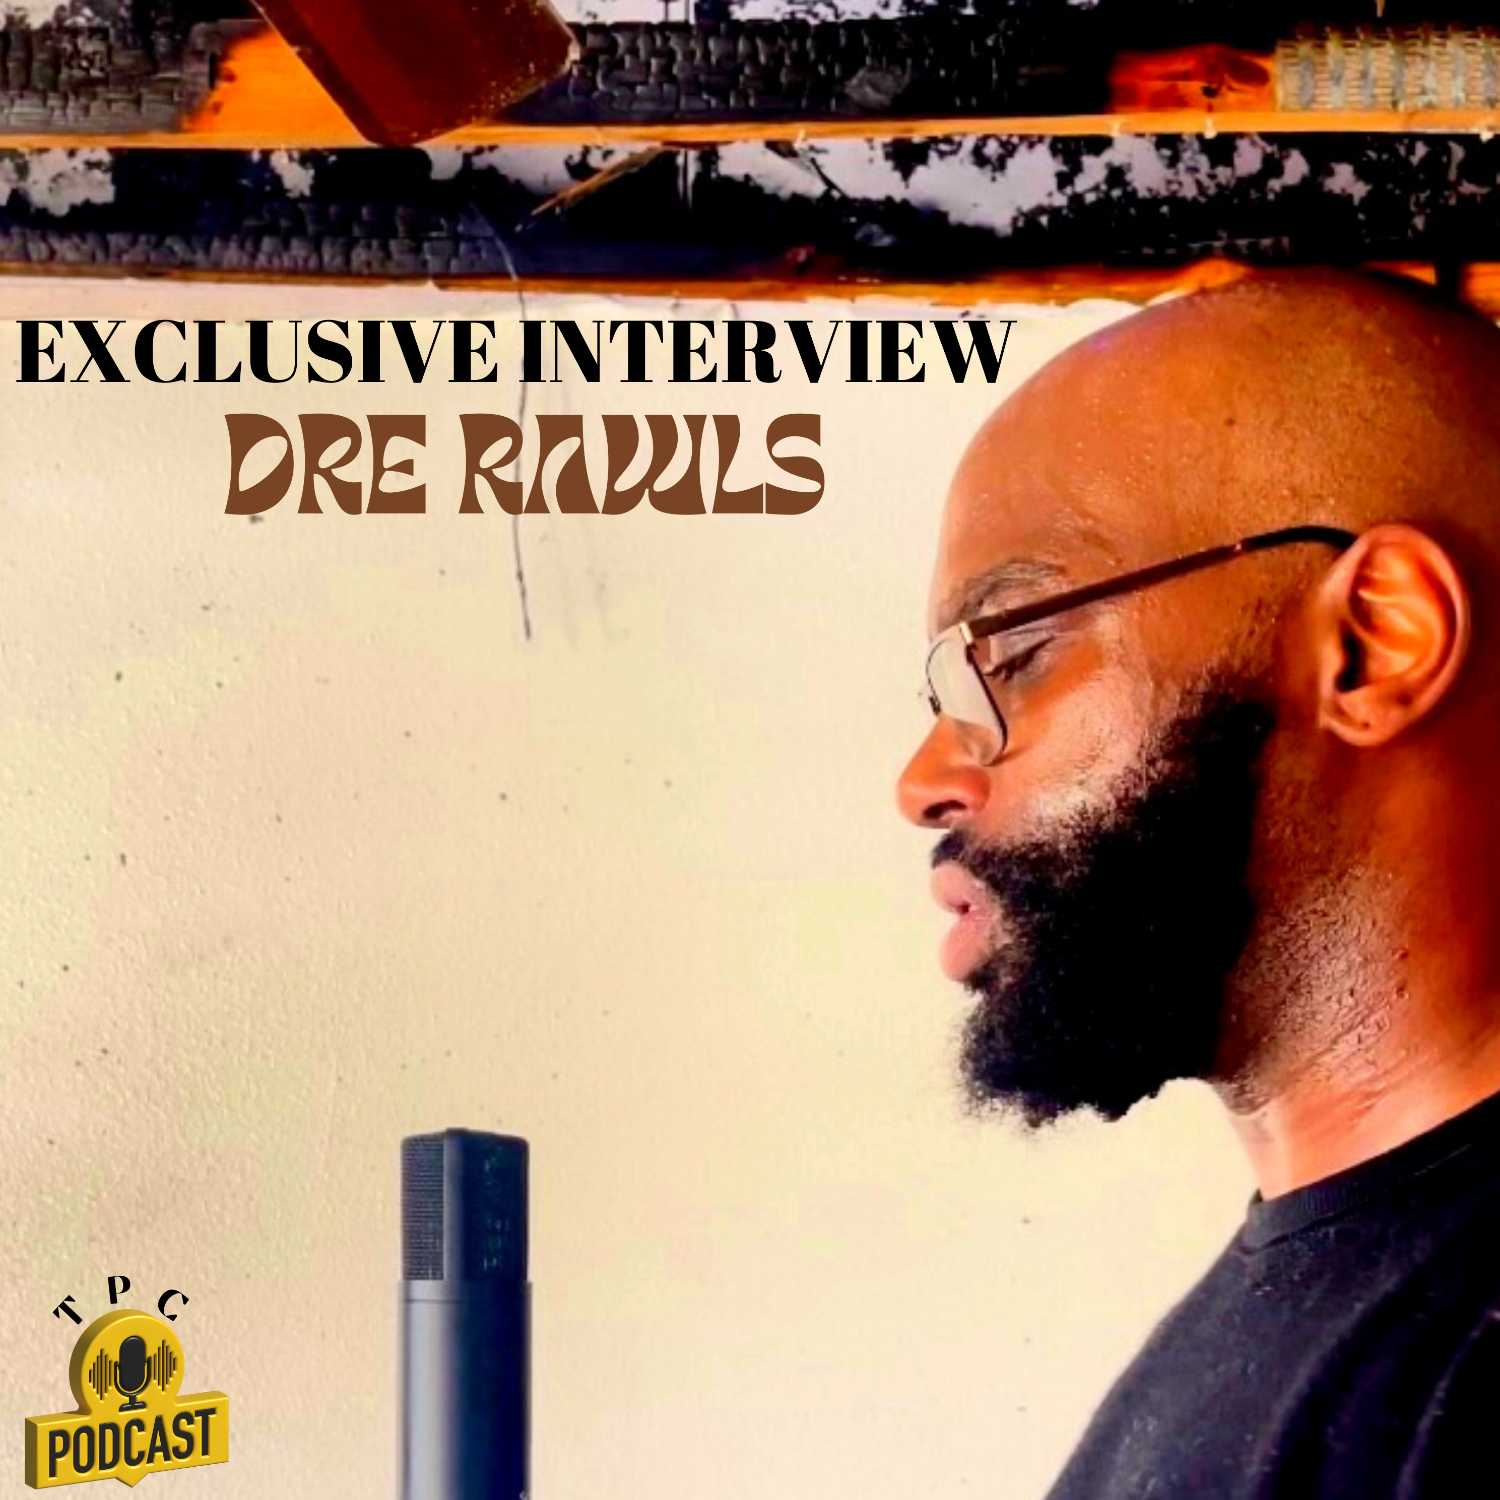 TPC-EXCLUSIVE INTERVIEW WITH INDIE ARTIST DRE RAWLS